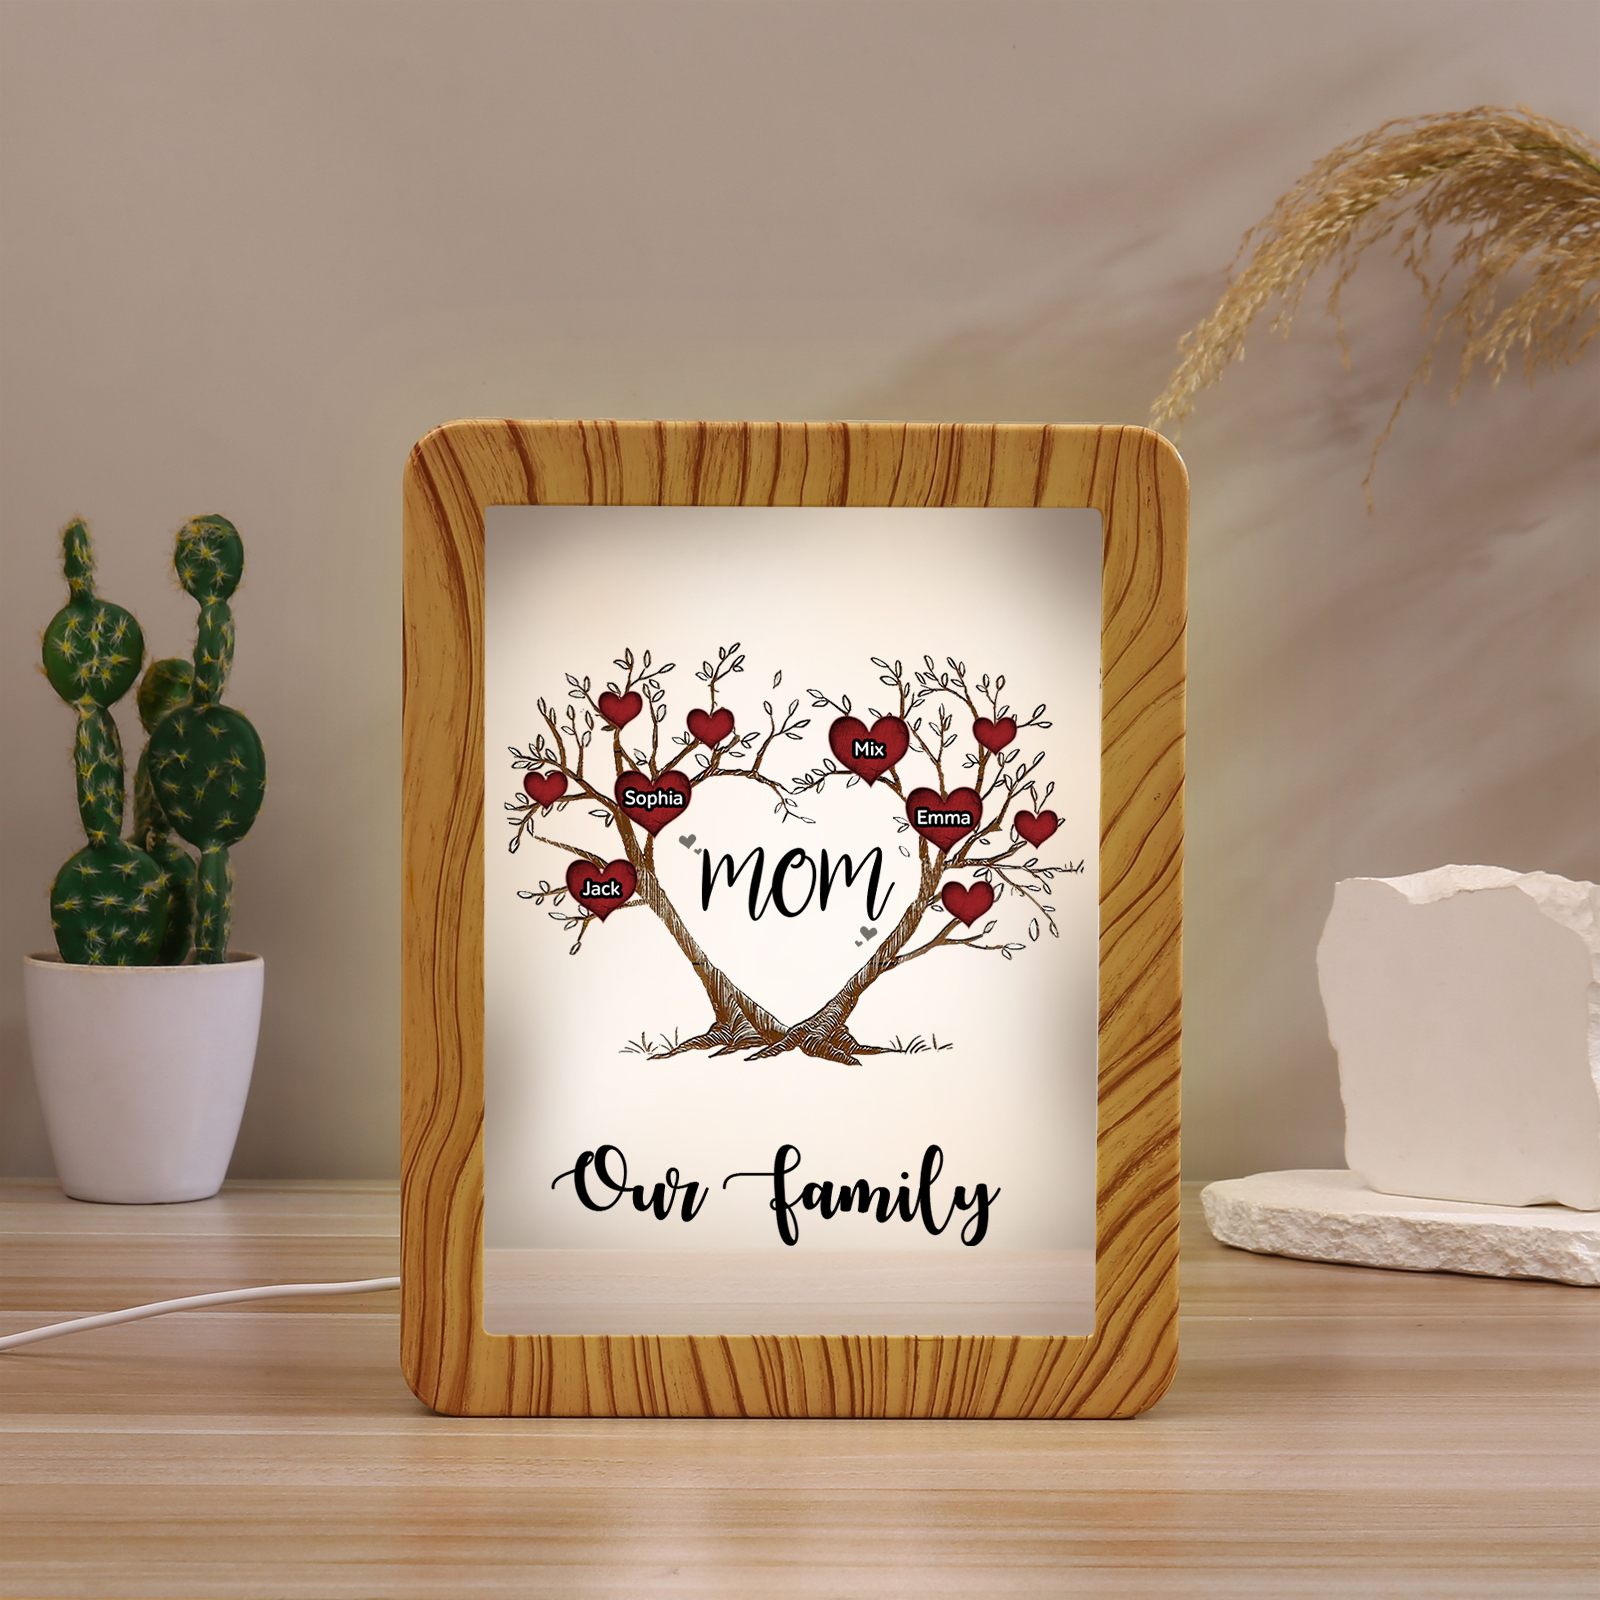 4 Names - Personalized Home Mirror Photo Frame Night Light Insert/Rechargeable Custom Text LED Night Light Gift for Mom